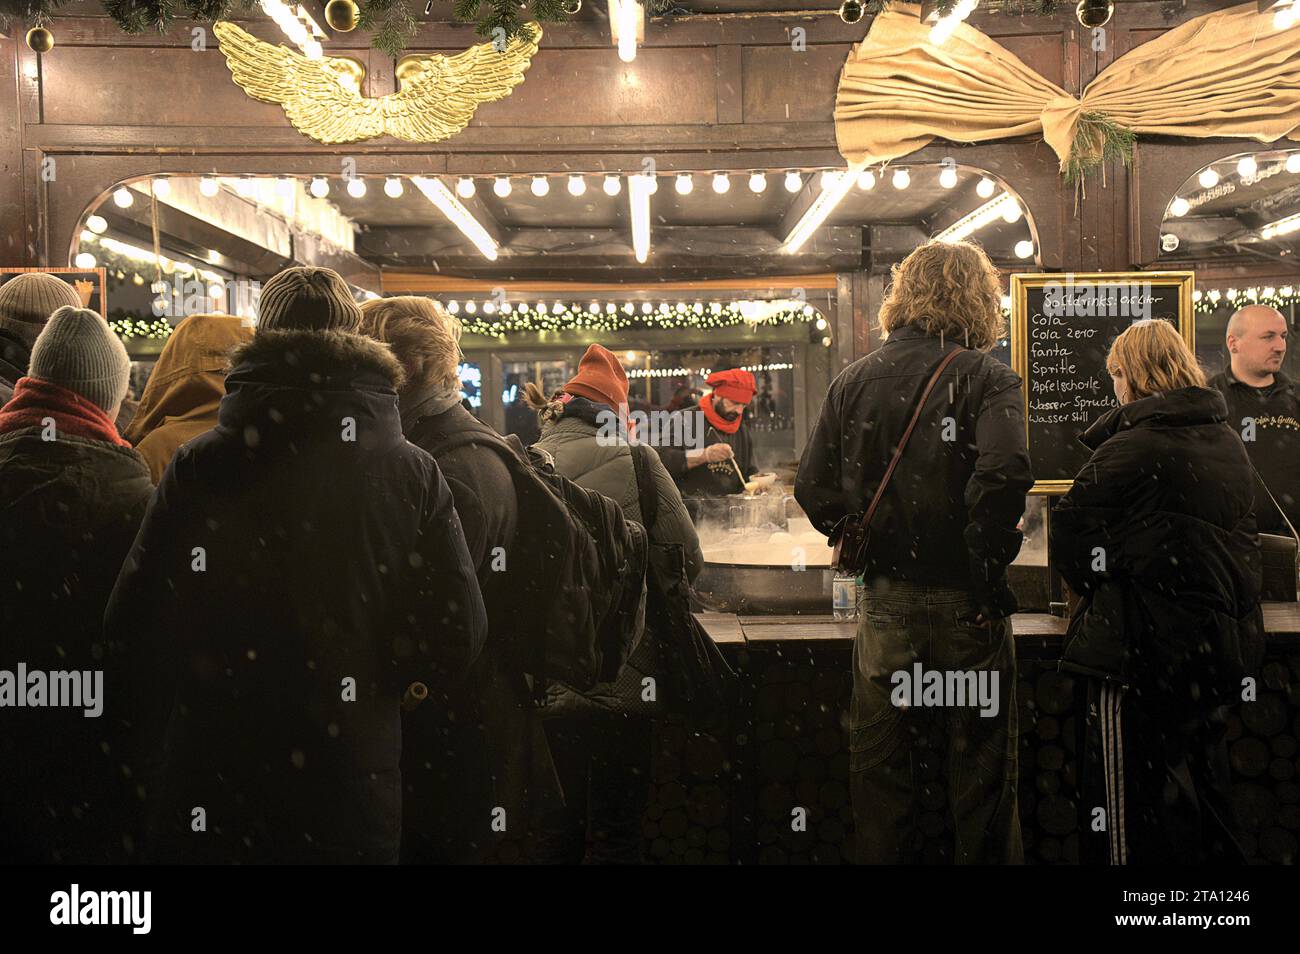 People lining up to buy food at the Christmas Market at Charlottenburg Palace, while it is snowing in Berlin, Germany Stock Photo